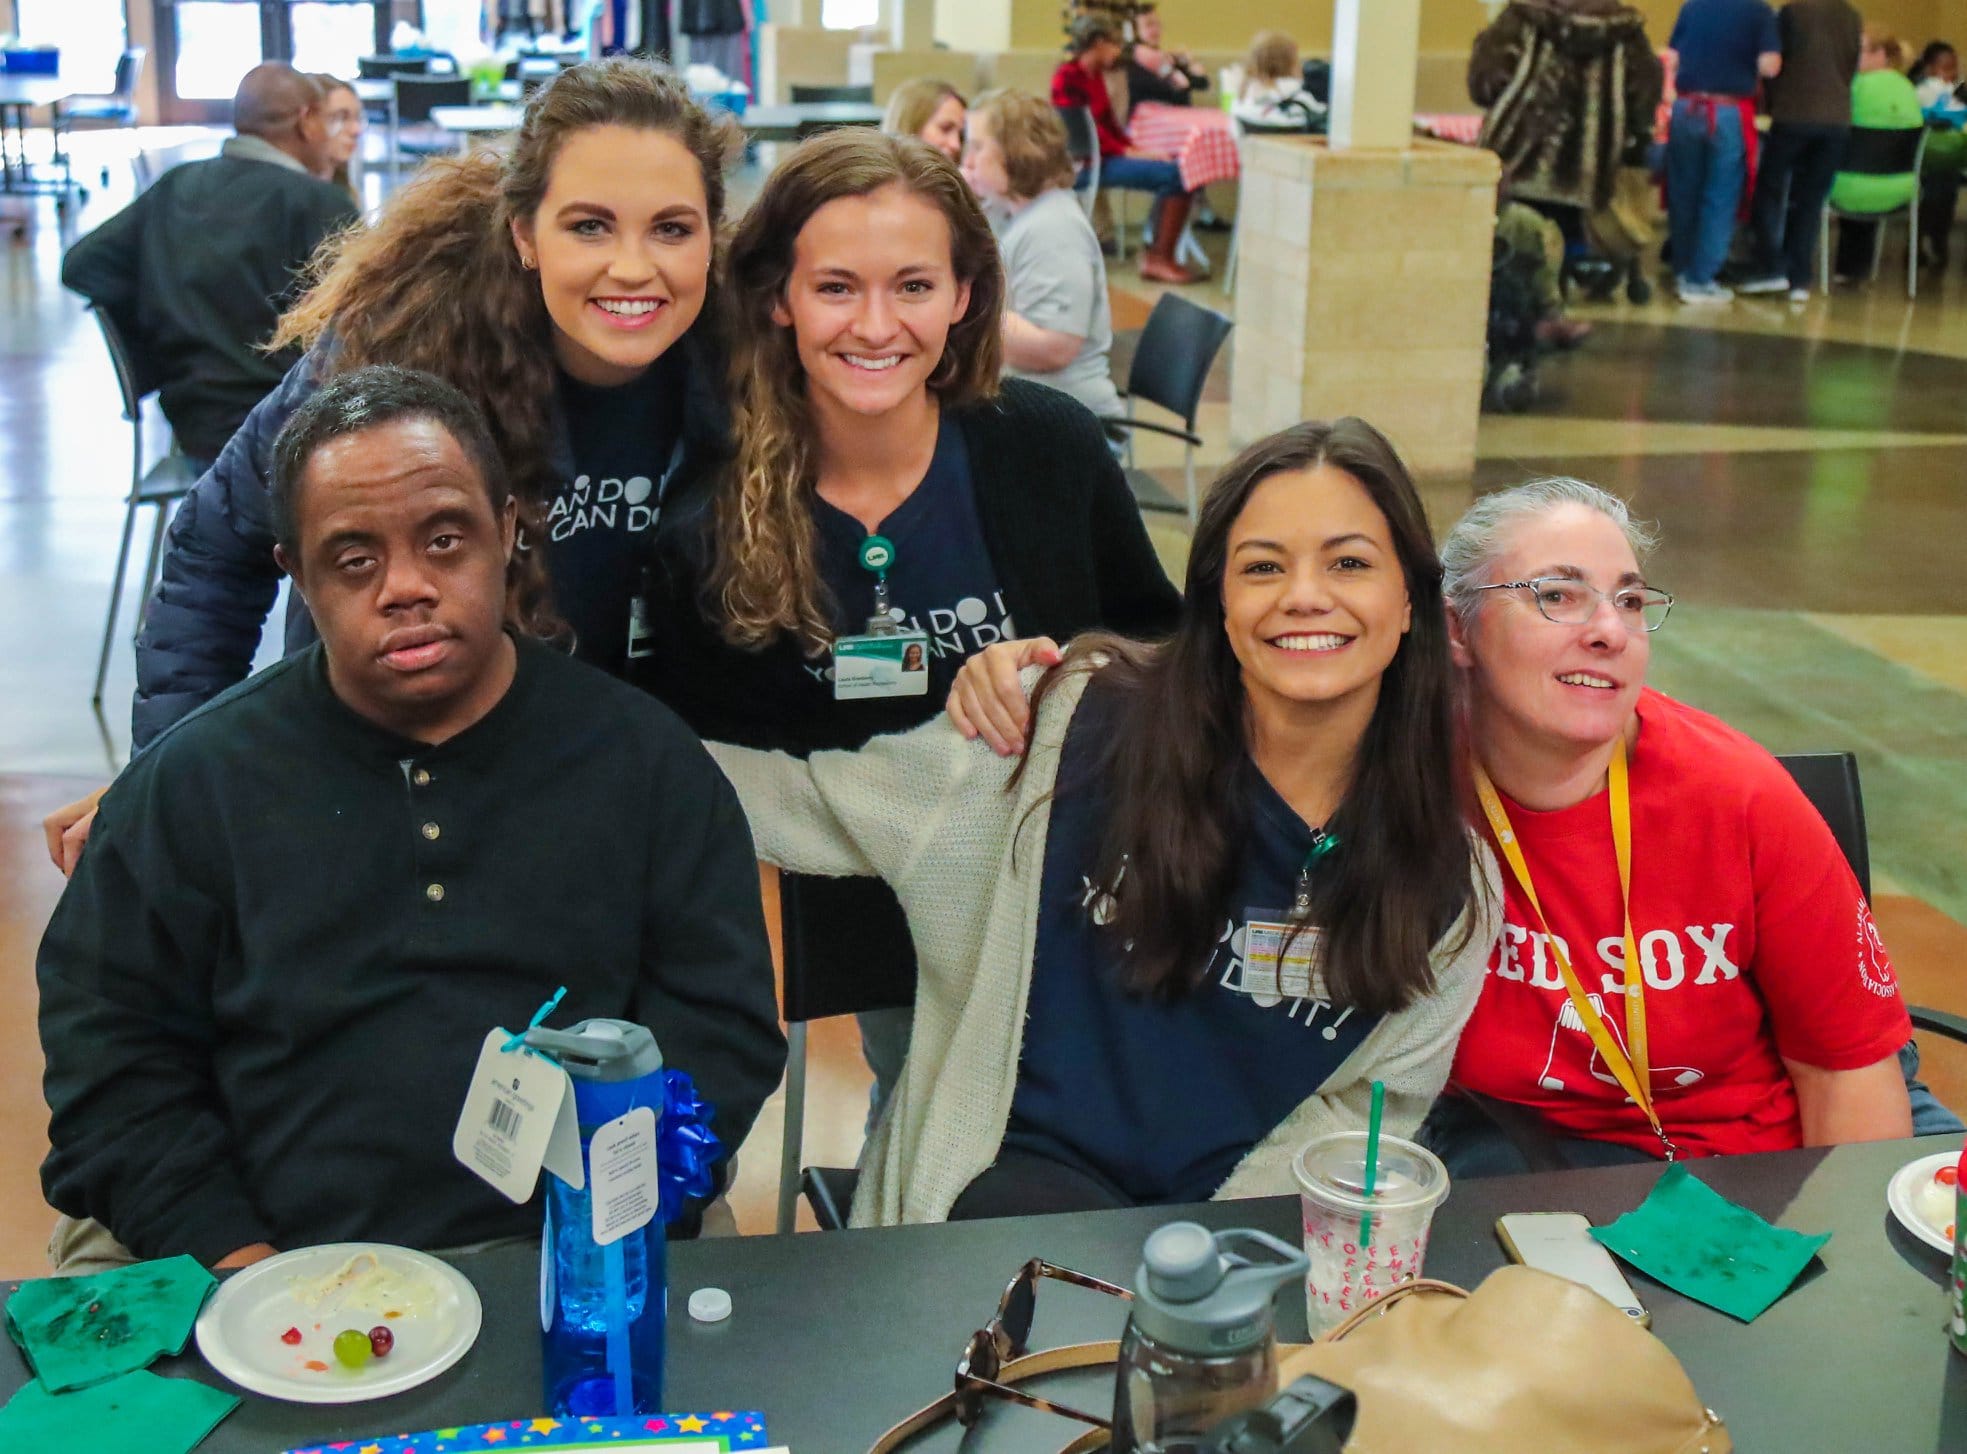 United Ability 5 ways to volunteer with adults who have special needs in Birmingham